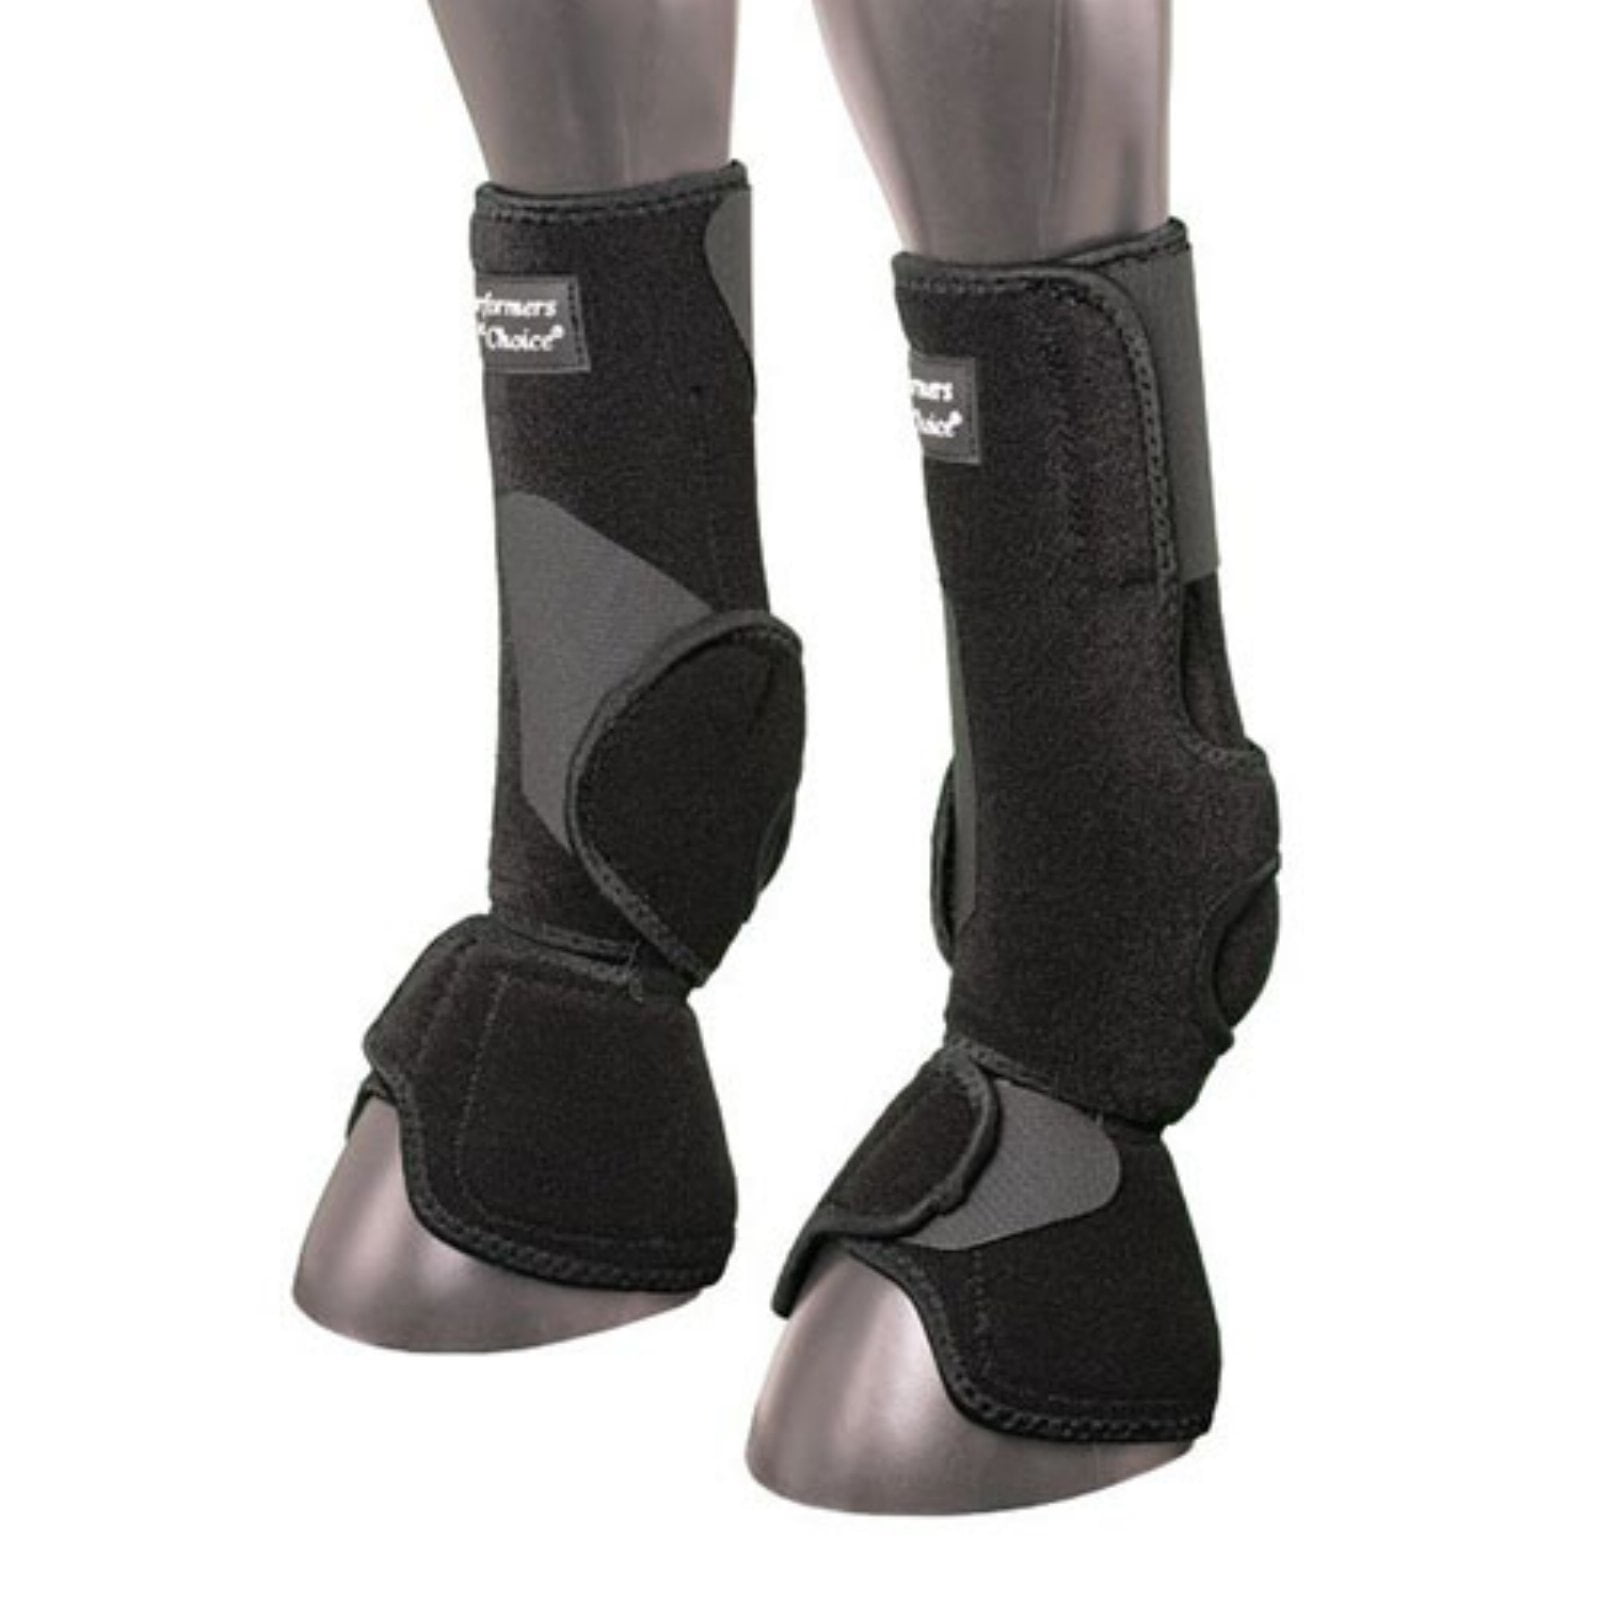 Performers 1st Choice Combo Boots - Set of 2 - Walmart.com